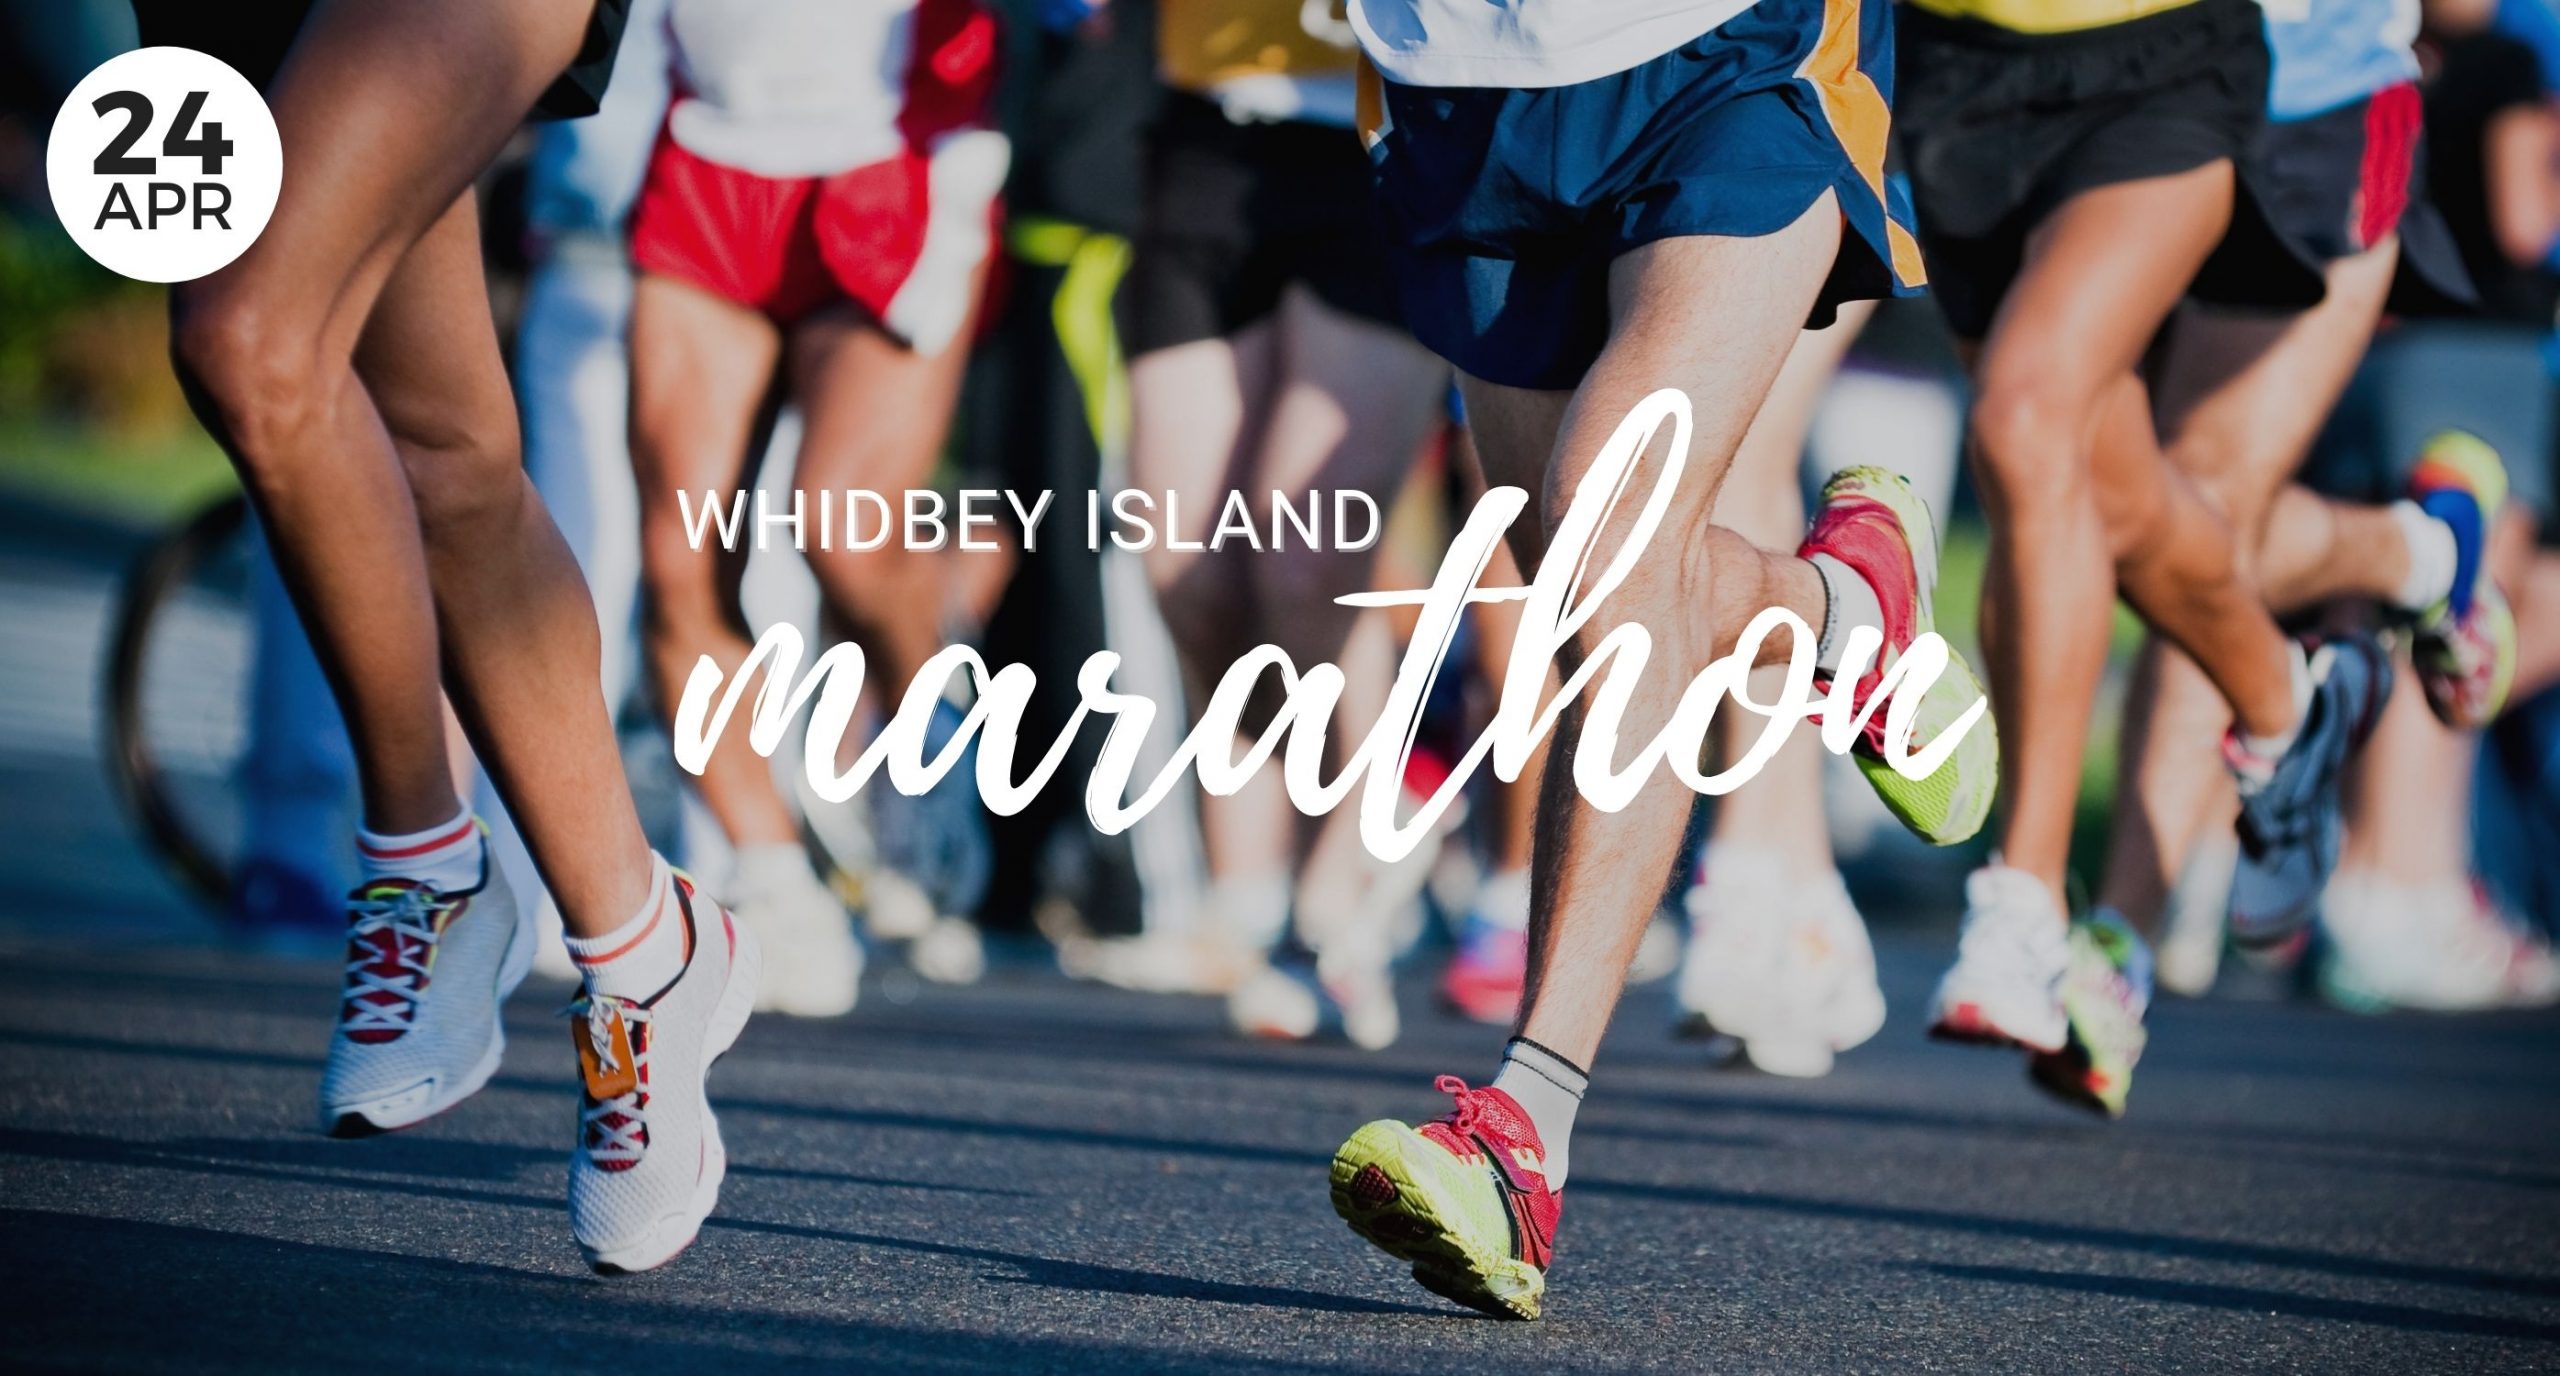 April Events, Whidbey Island Marathon, Whidbey Island, Local events, Whidbey Real Estate